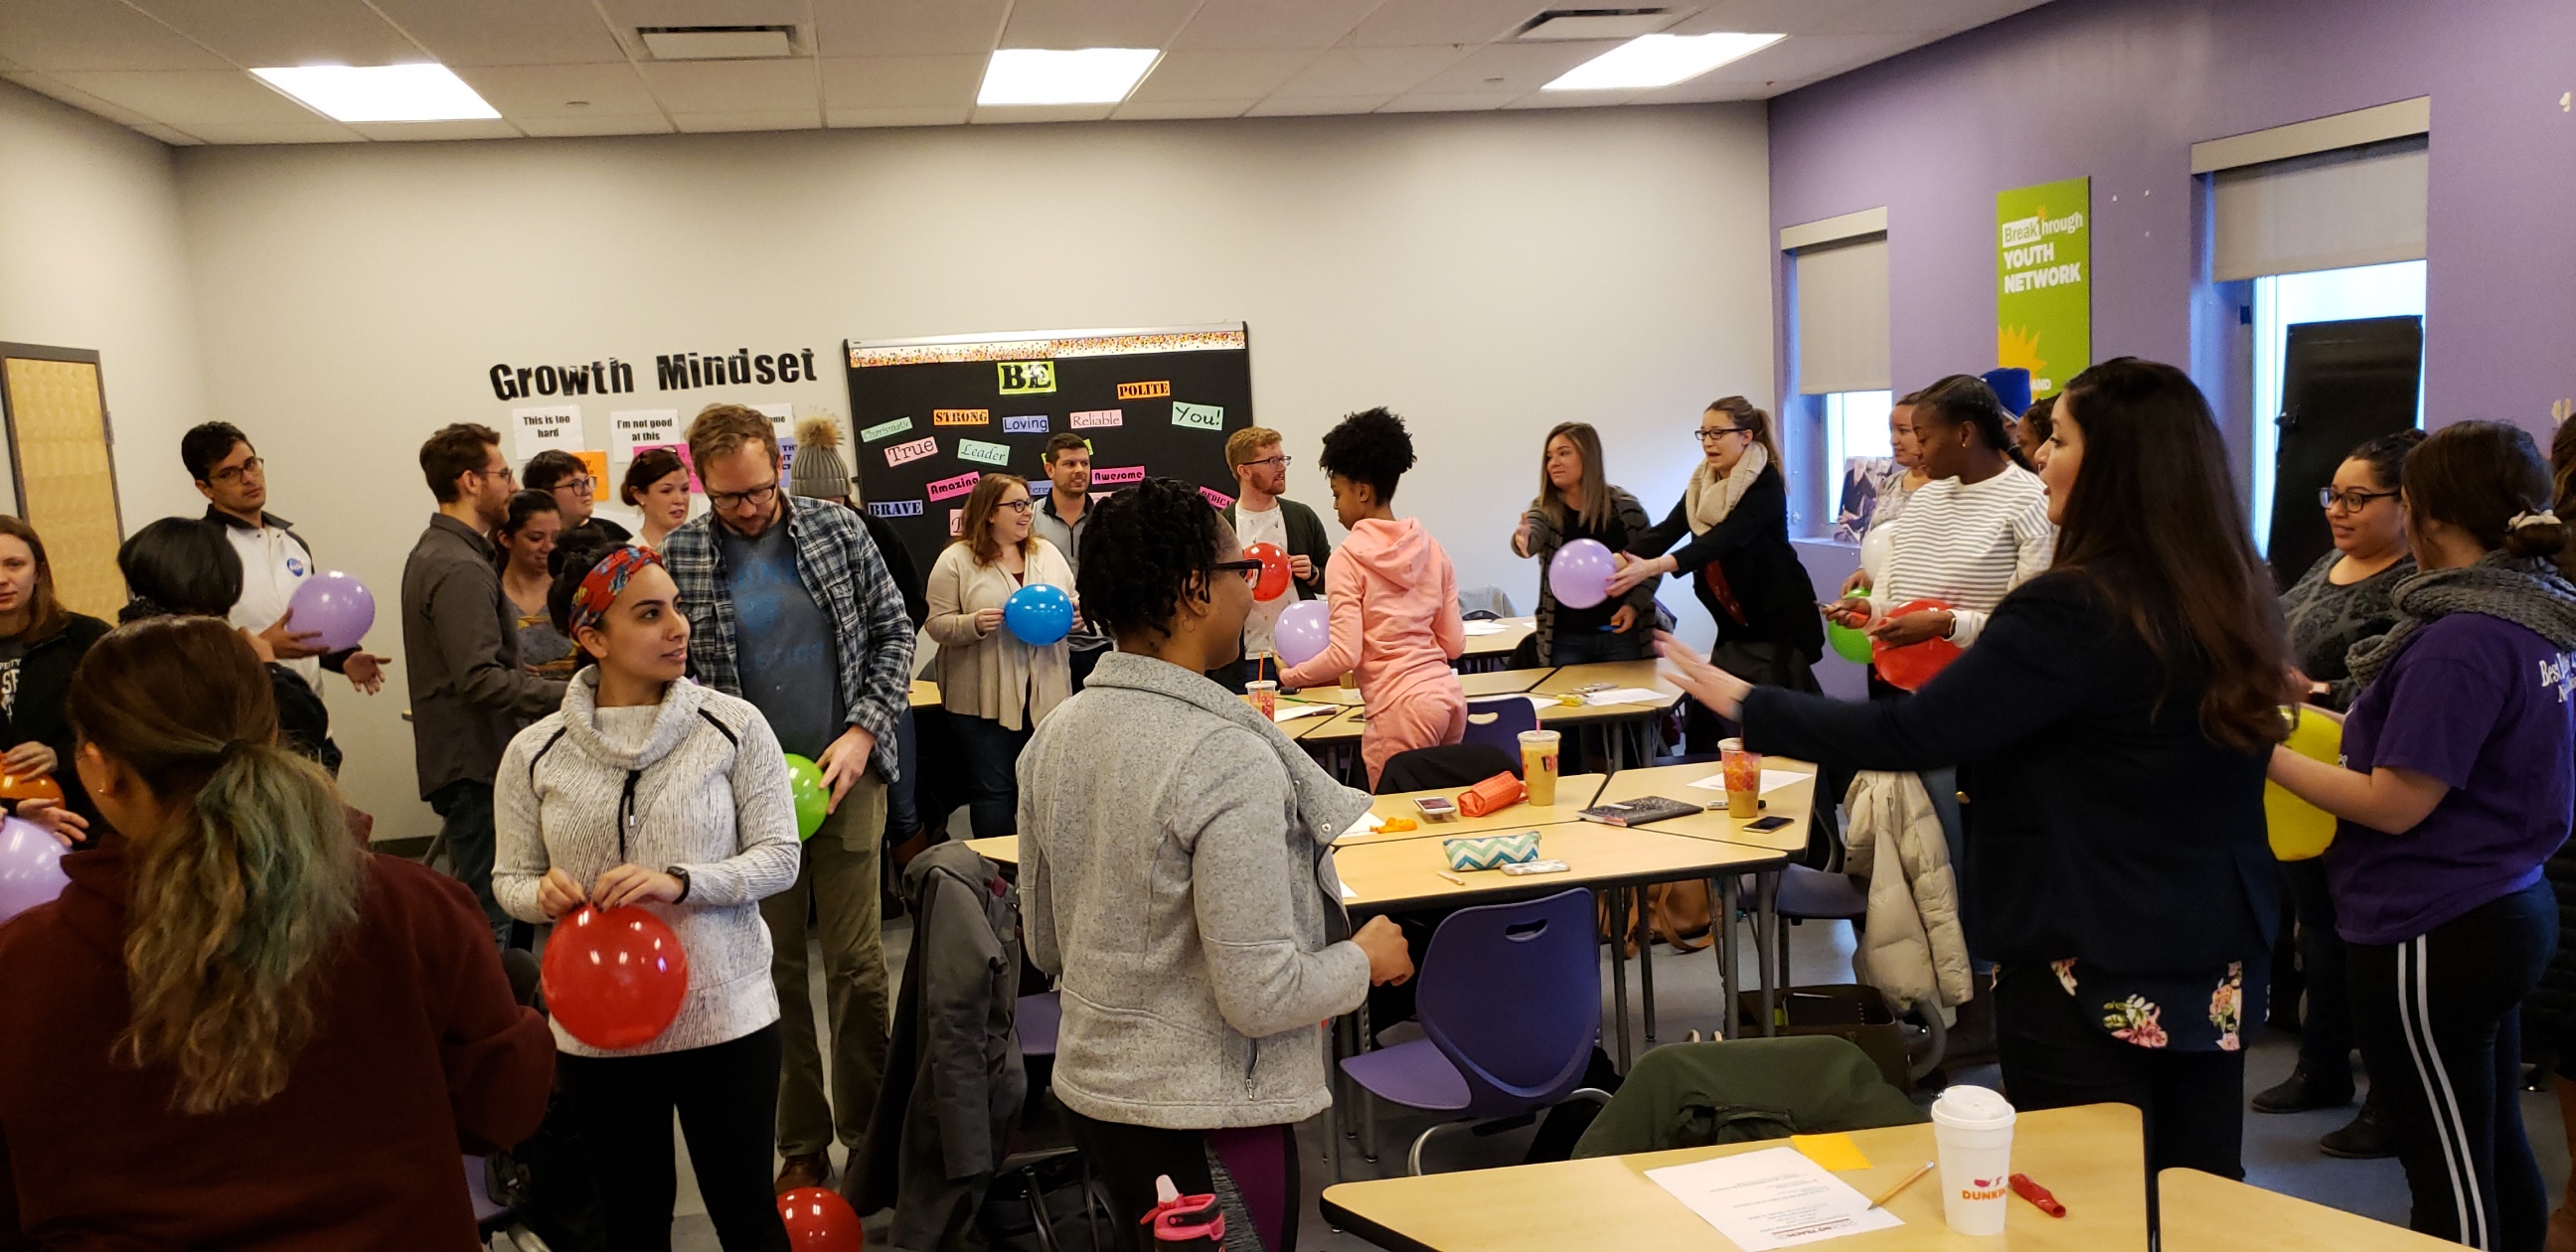 During Carrie Conover’s teacher mood workshop, educators anxiously popped balloons to explain their specific moods and attitudes during the school day.